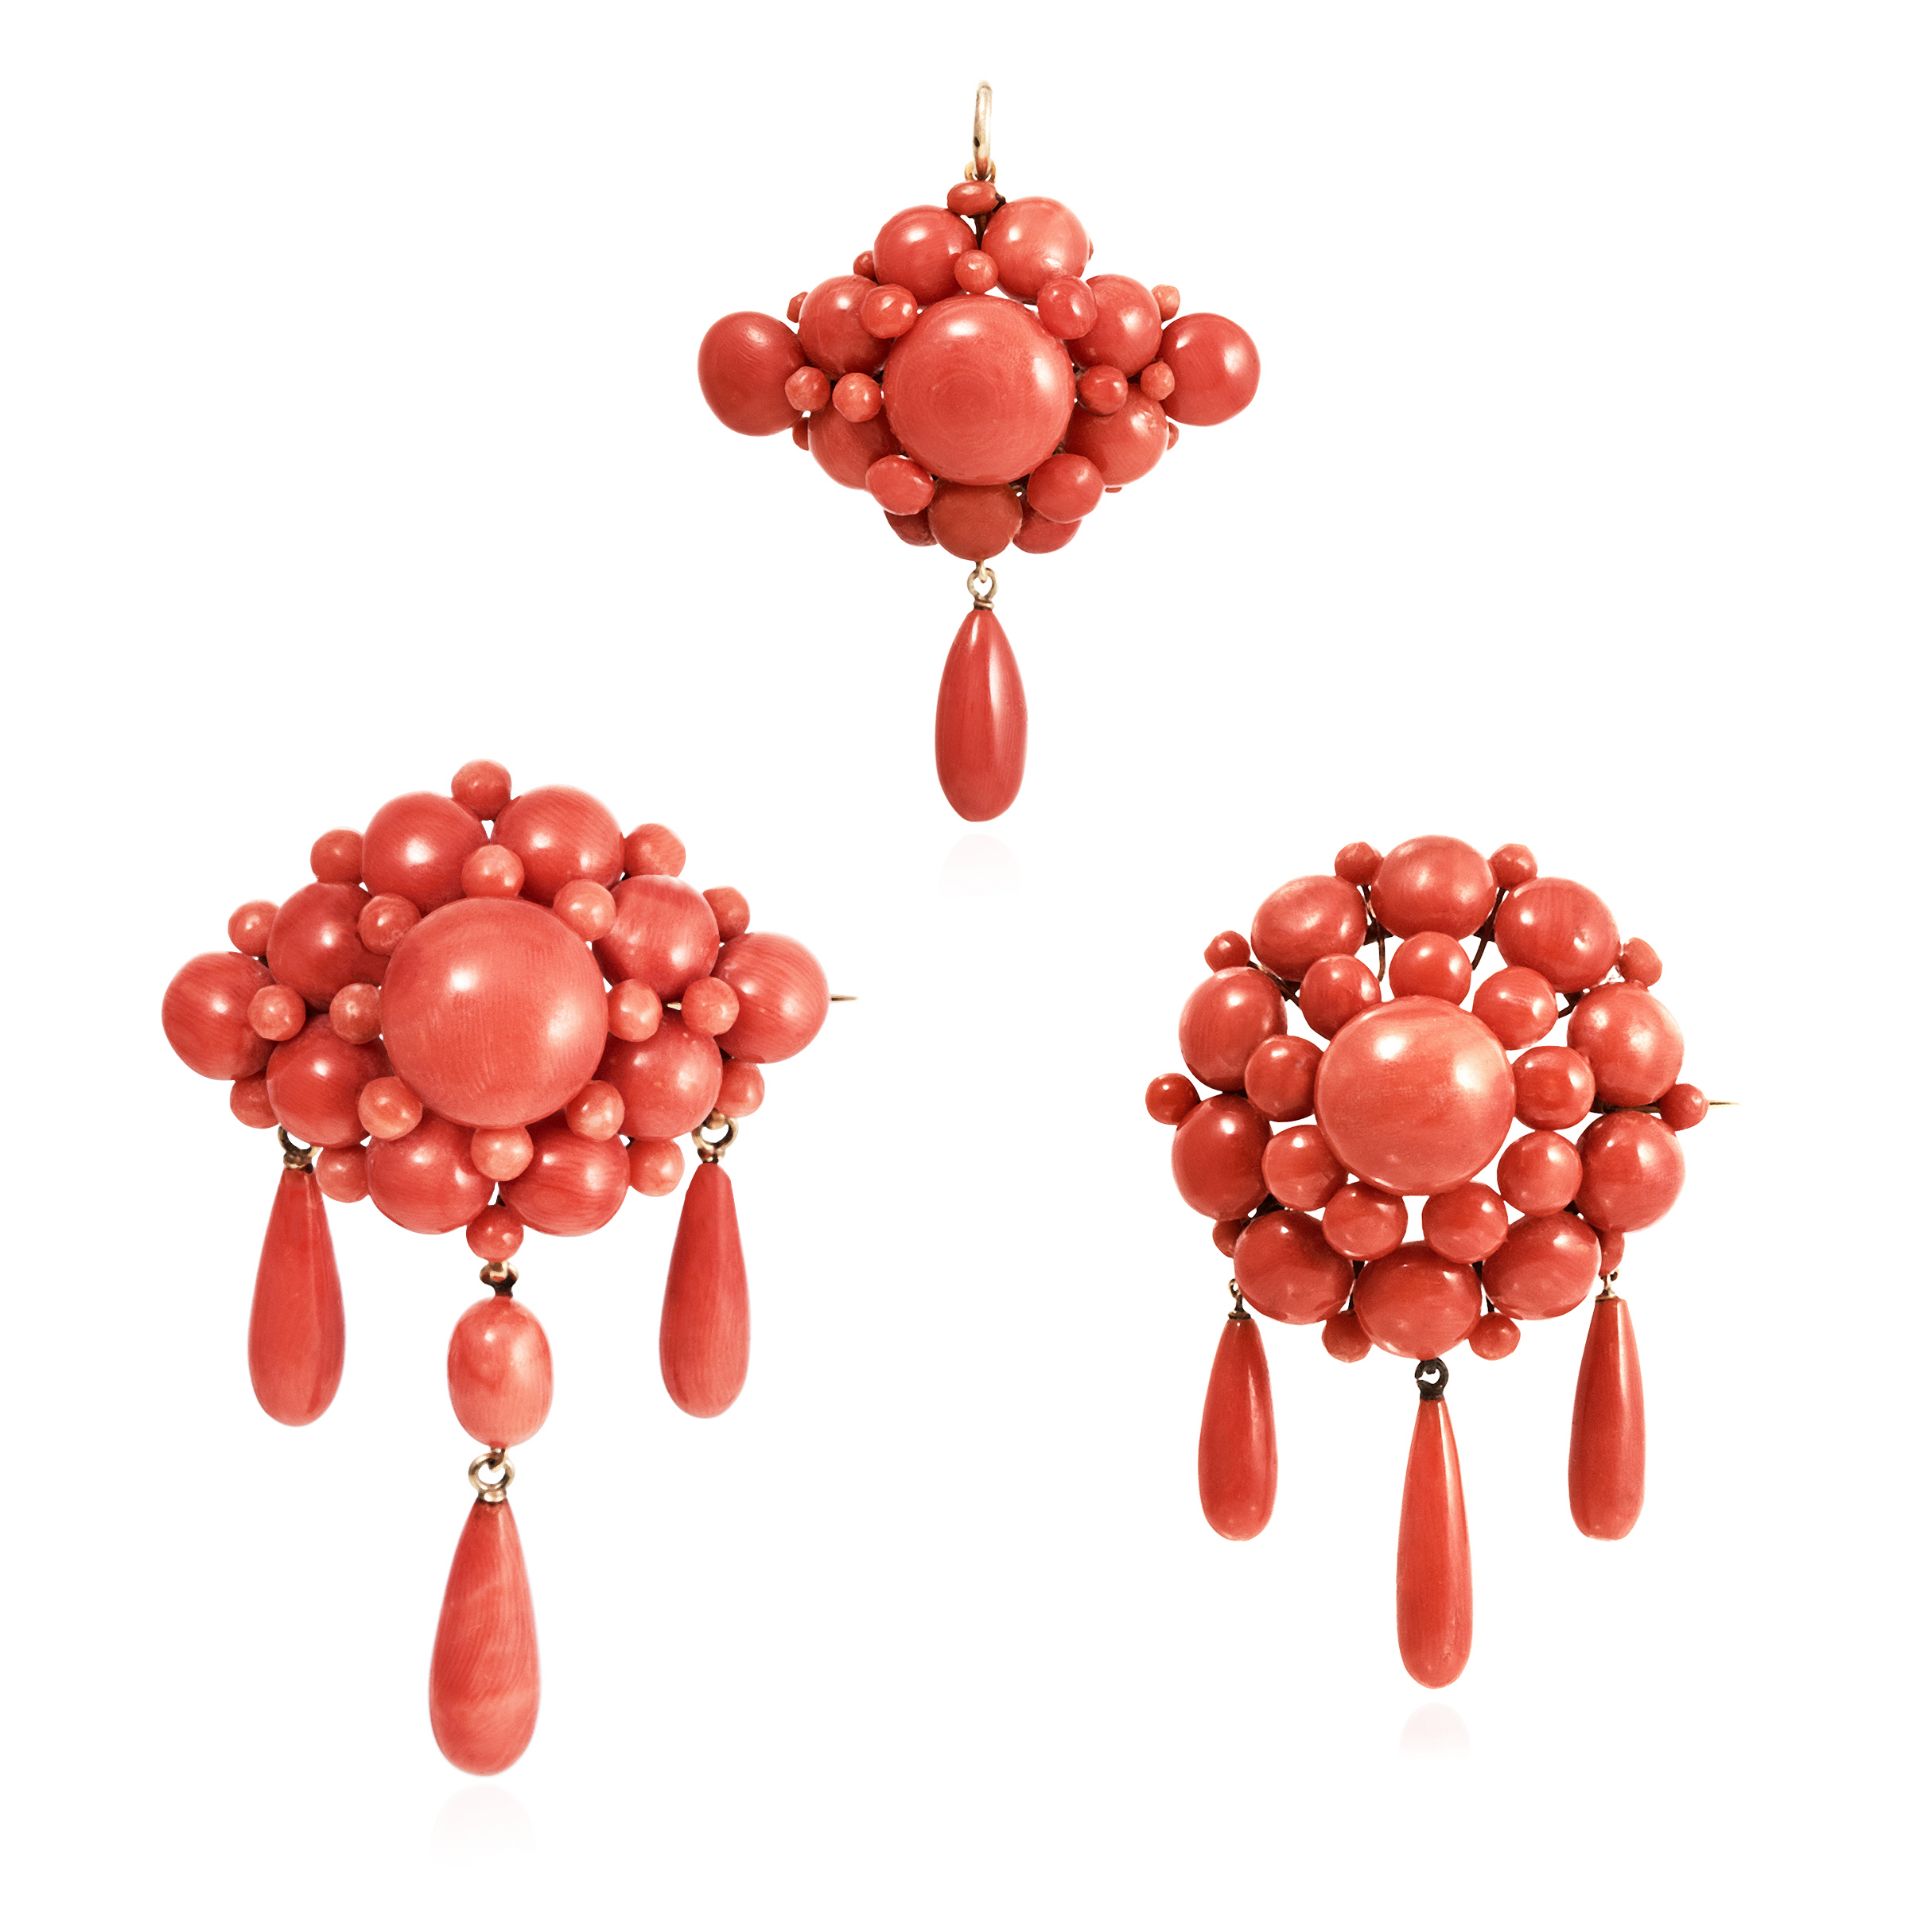 THREE ANTIQUE CORAL BROOCHES, ITALIAN CIRCA 1860 each designed as a cluster of coral beads